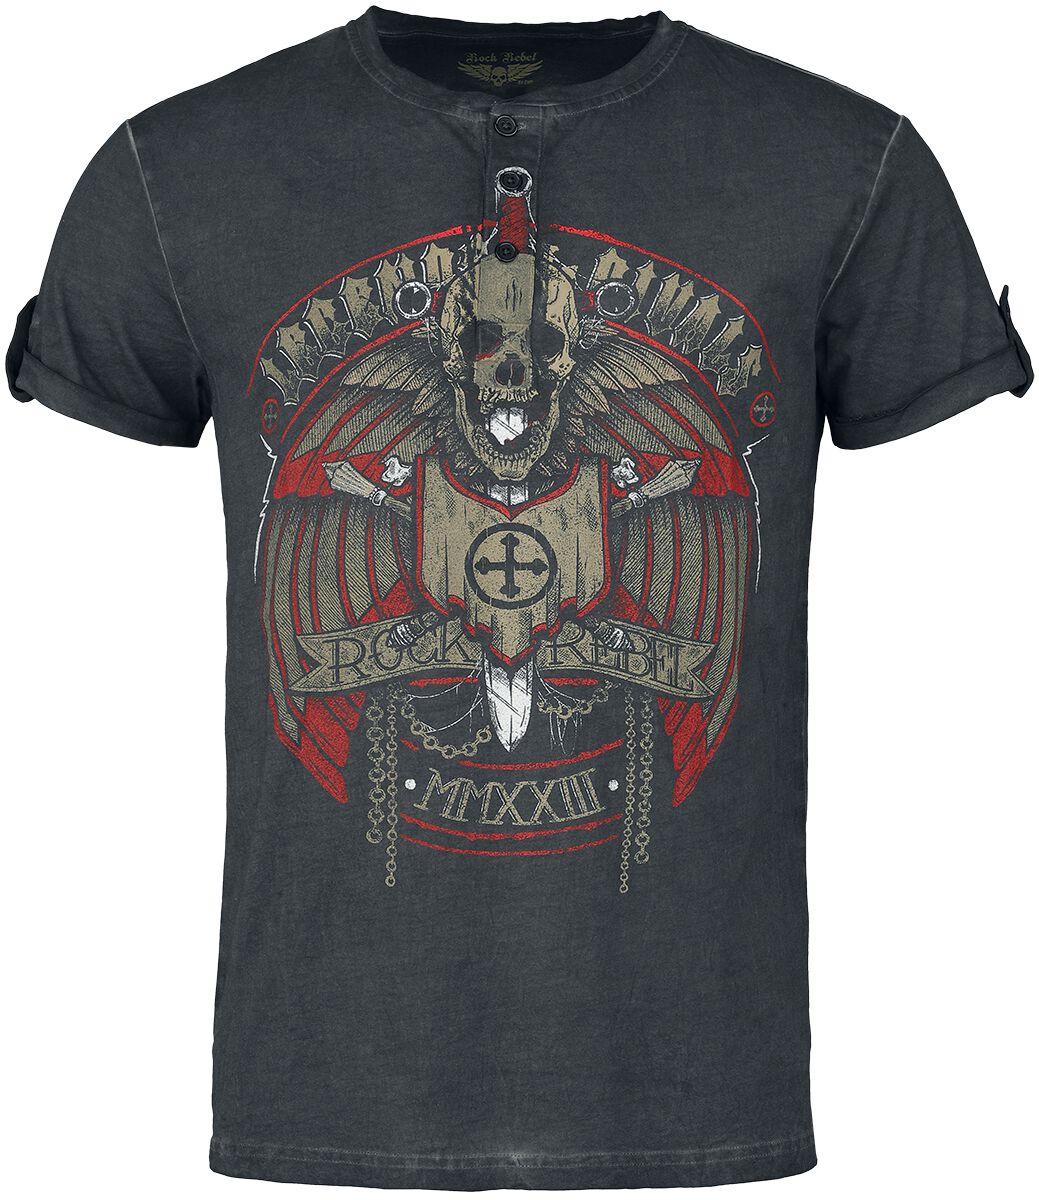 Image of T-Shirt di Rock Rebel by EMP - Vintage-style t-shirt - S a L - Uomo - grigio